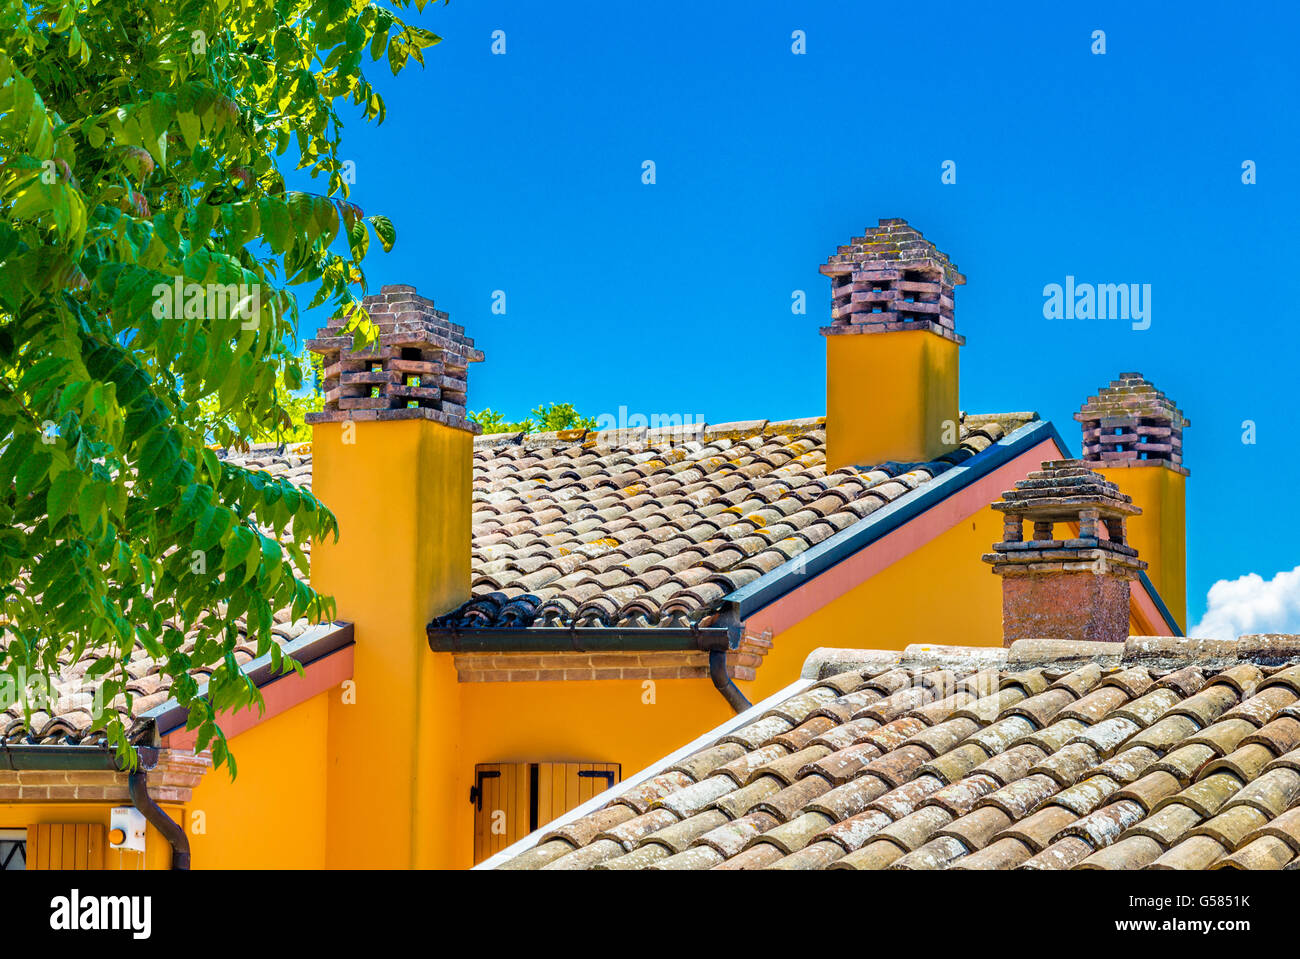 tiles of ancient village roofs in Italy Stock Photo